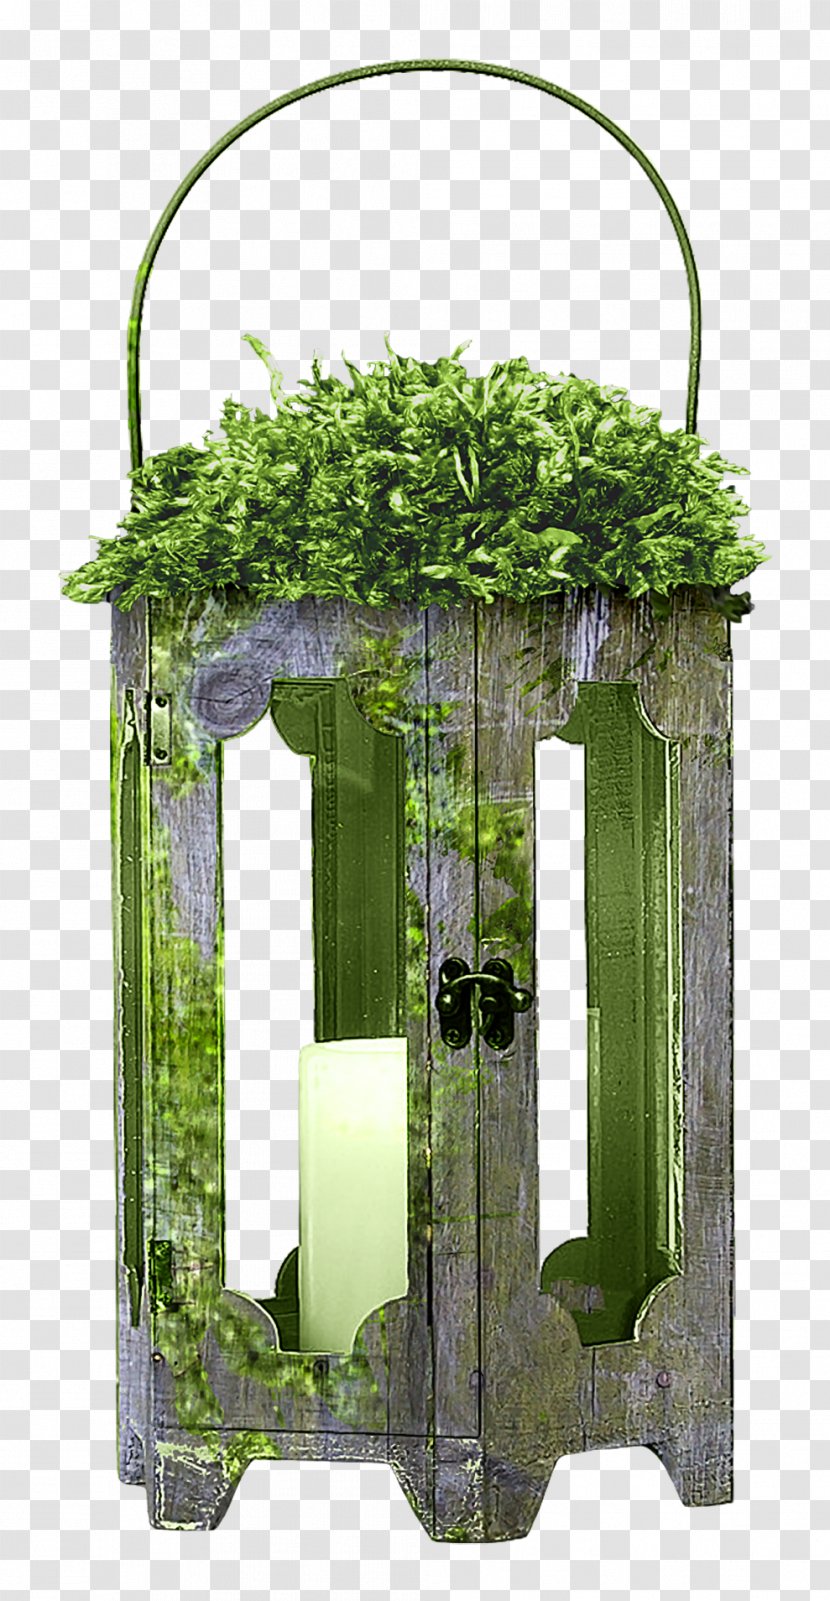 Green Arch Flowerpot - Creative Candle Lamps Transparent PNG